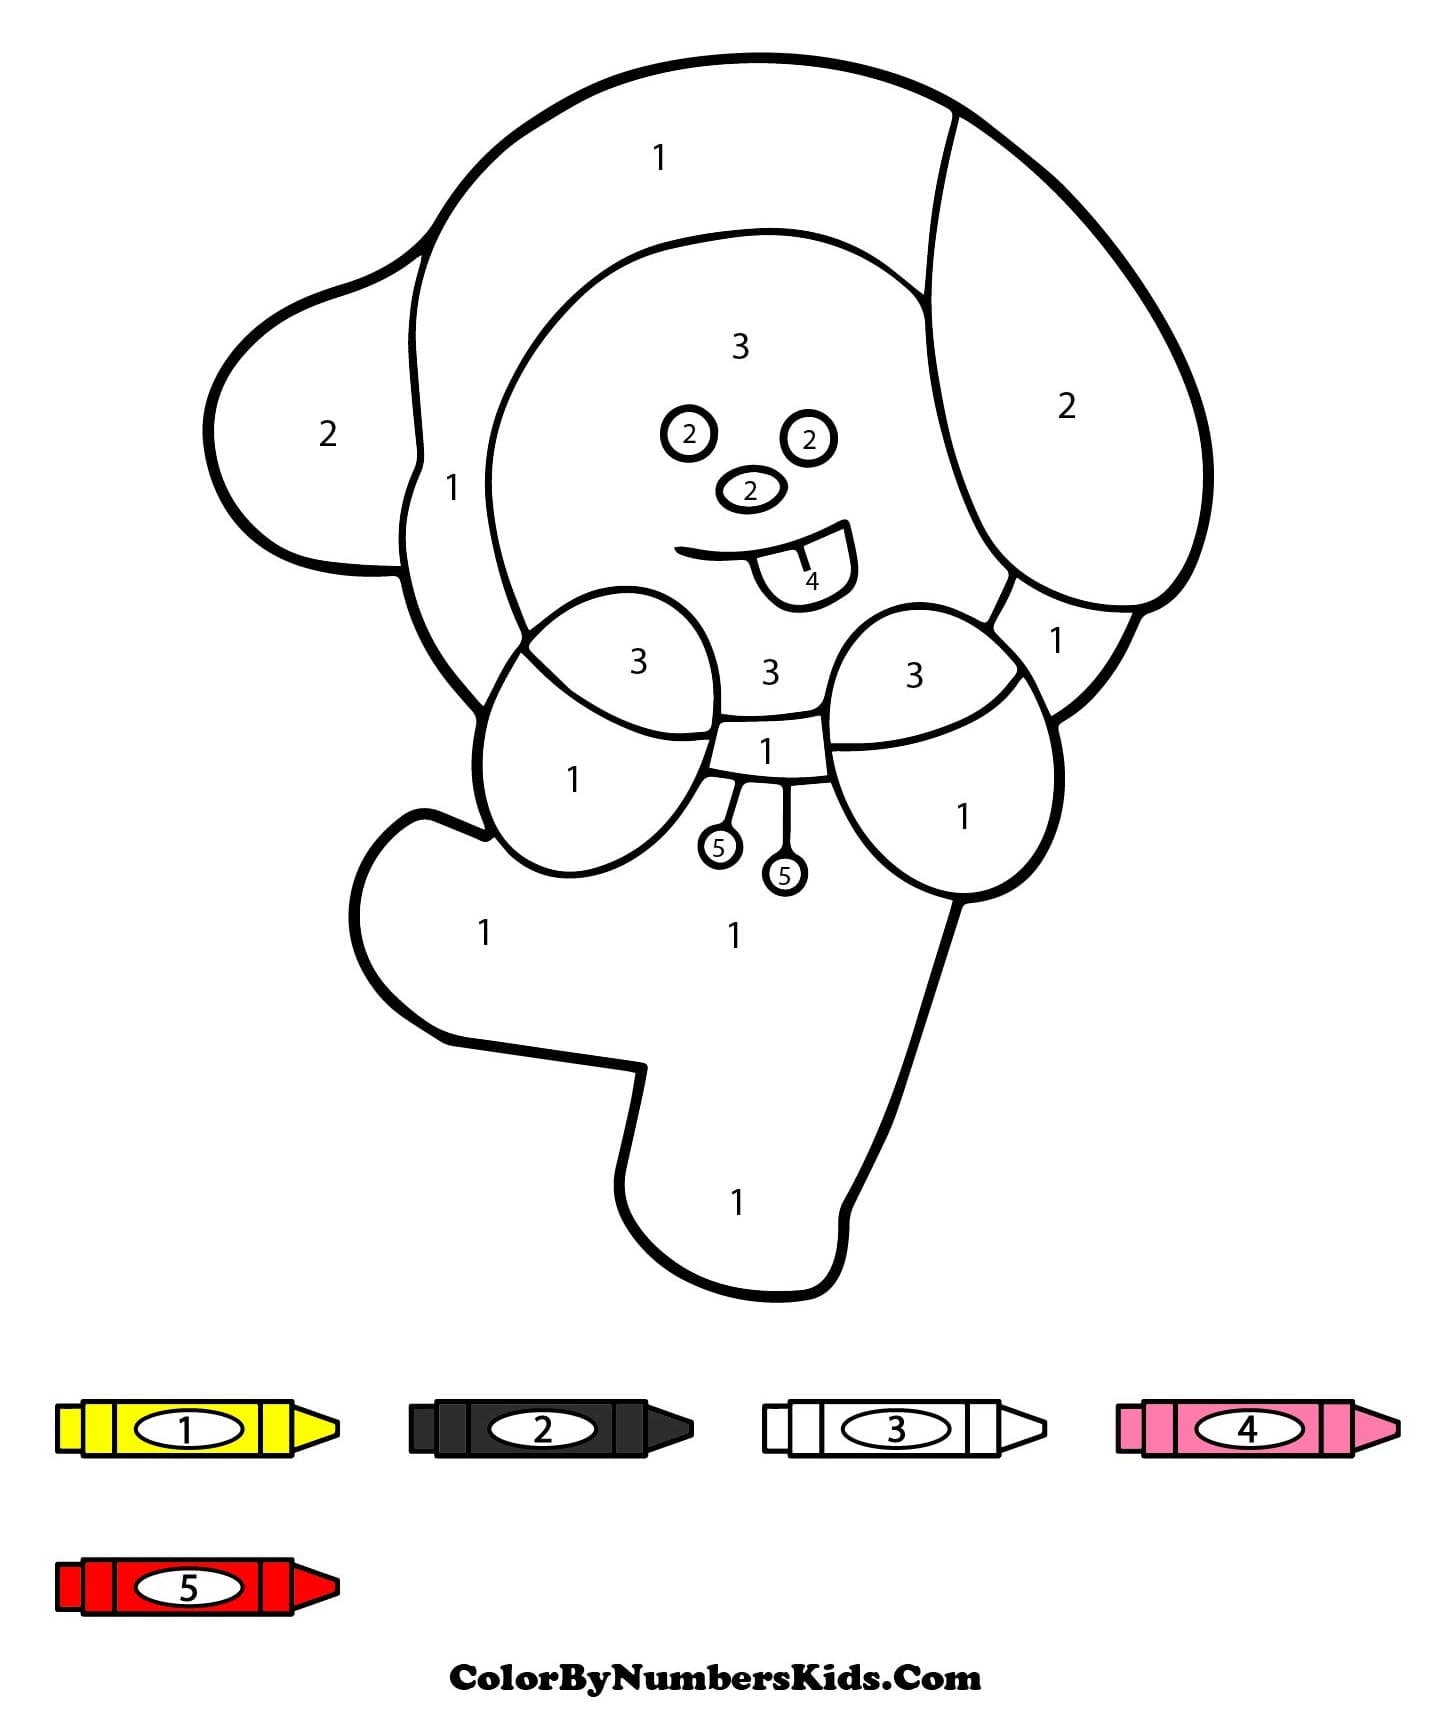 Chimmy BT21 Color By Number